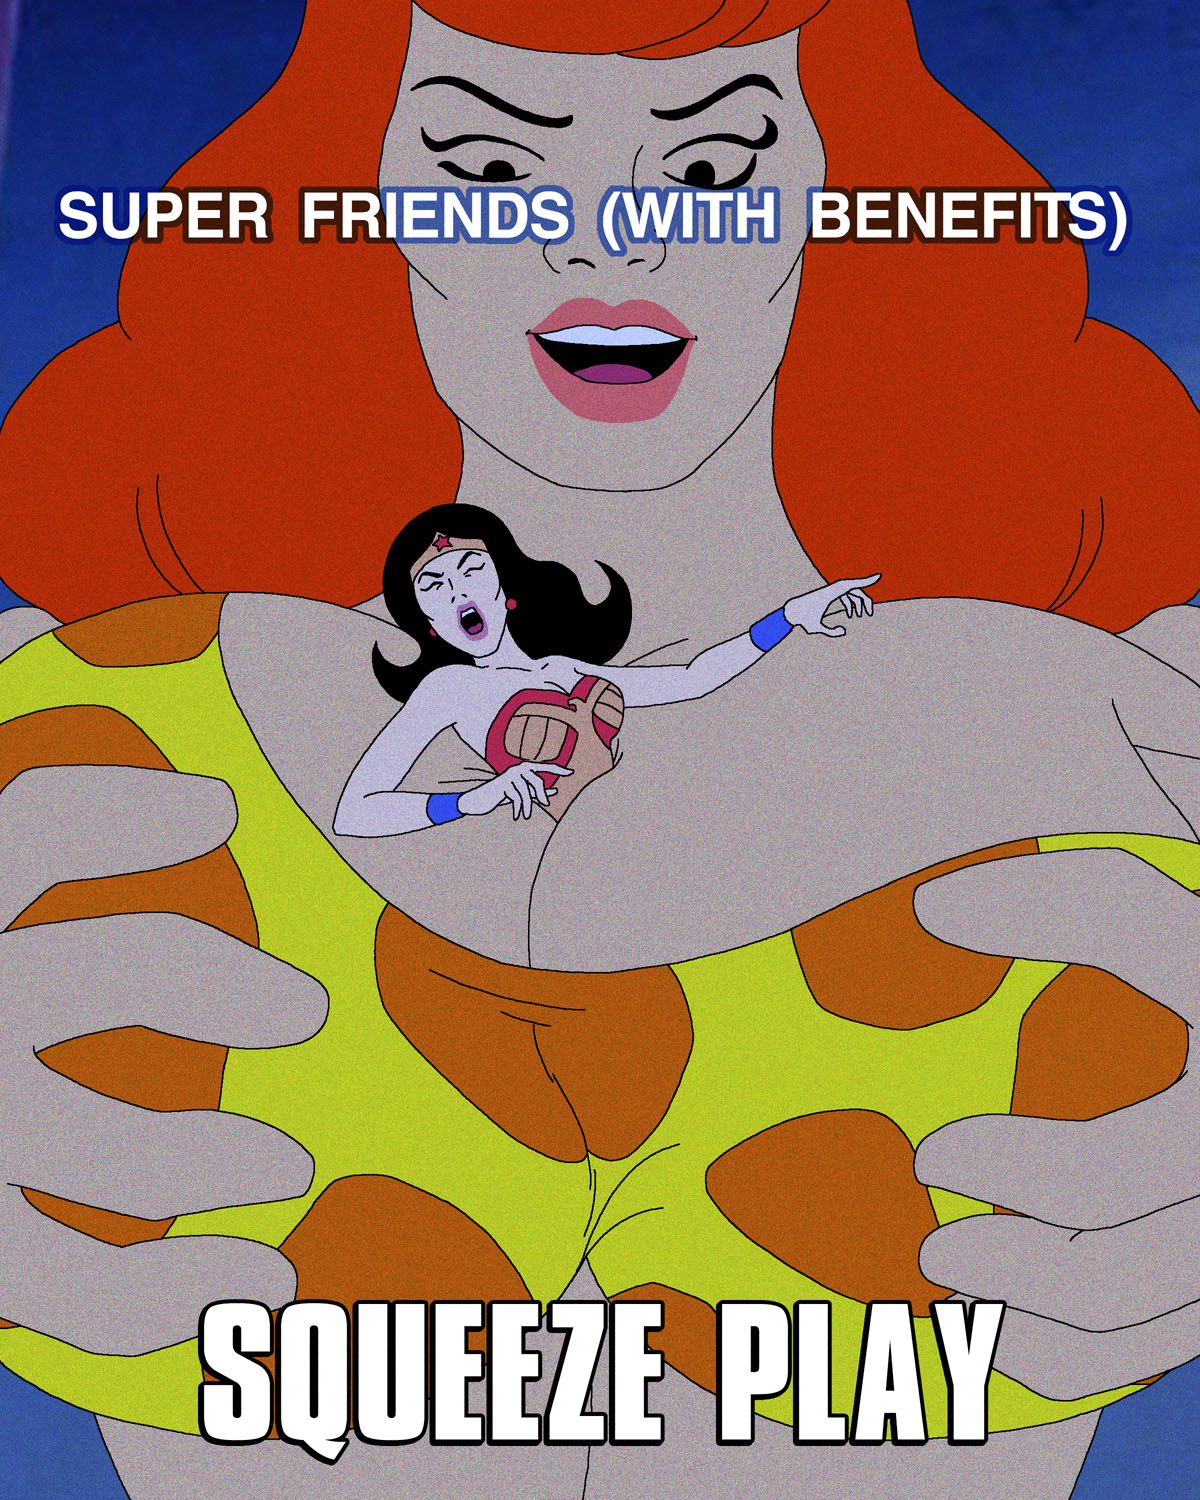 Super Friends With Benefits Squeeze Play 01